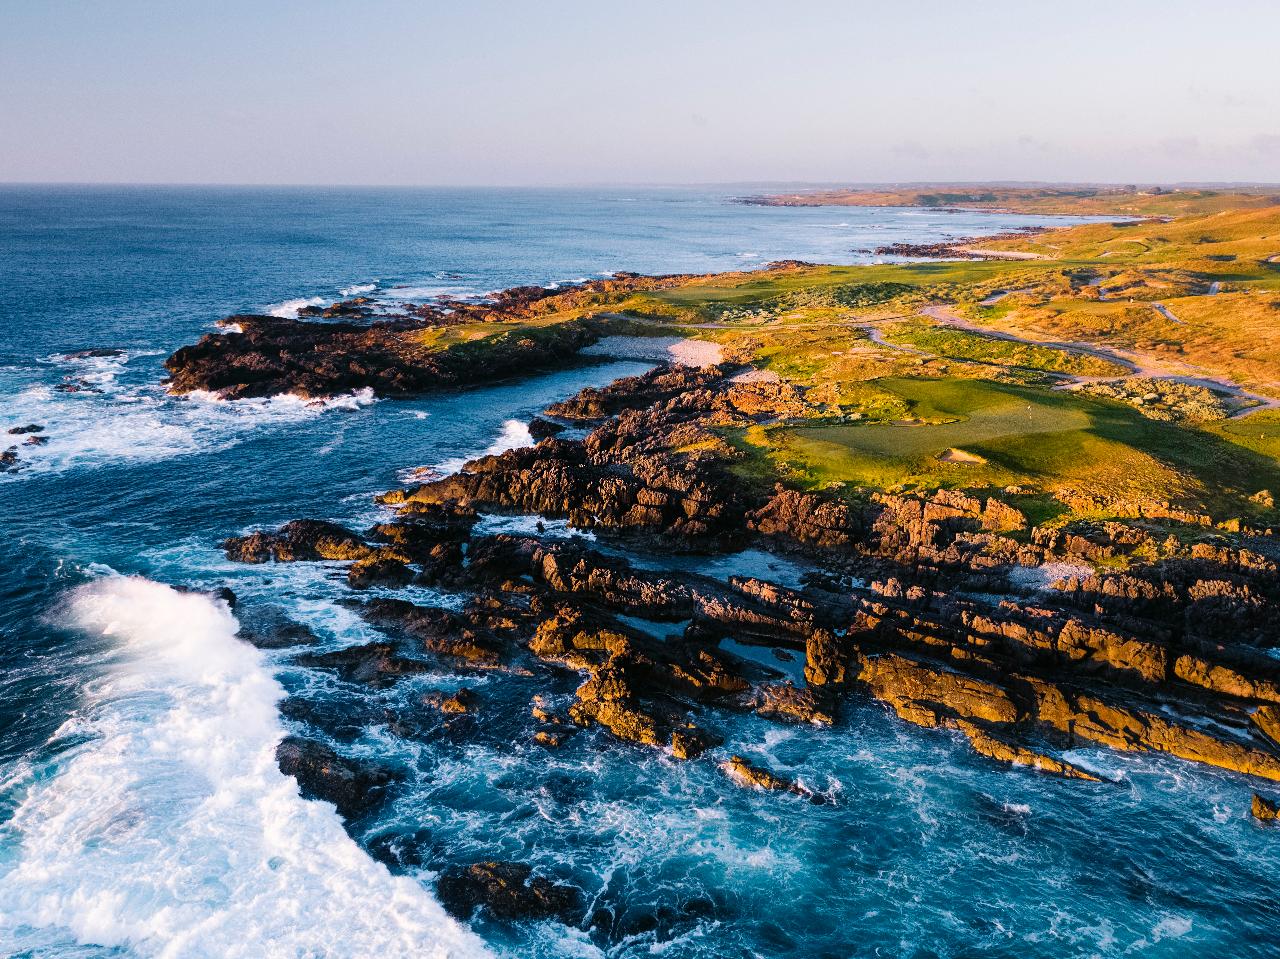 King Island Pro-Am - Practice Rounds Package - 4 days / 4 nights